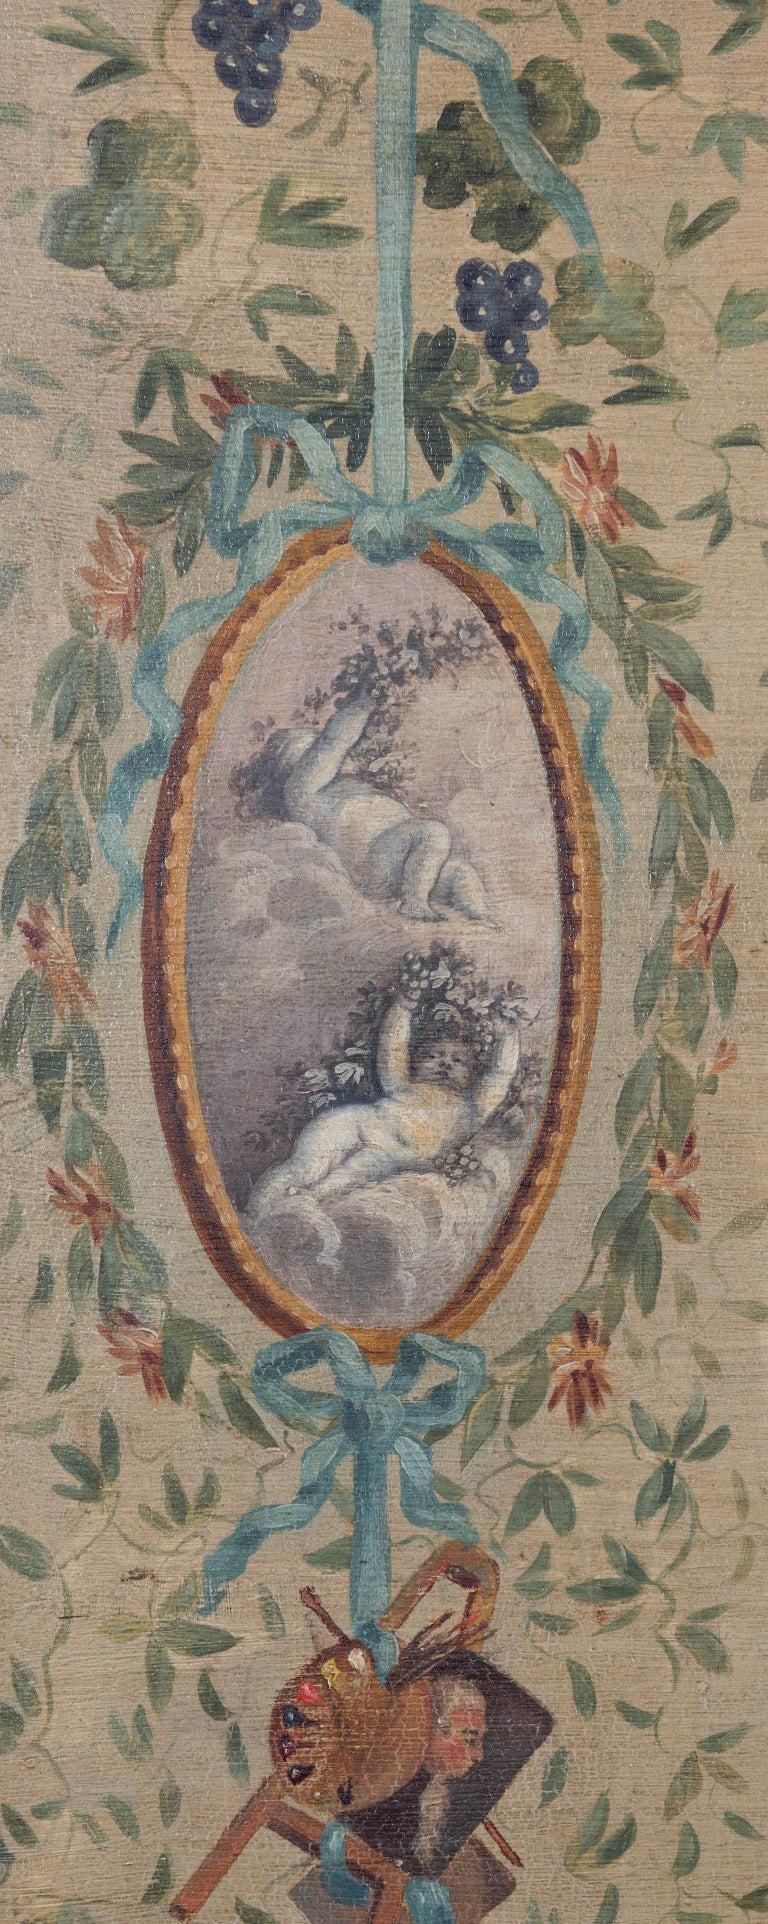 Each panel painted with classical oval shaped medallions depicting putti, surrounded by floral wreaths, musical trophies, foliage and ribbons on a pale olive green ground.